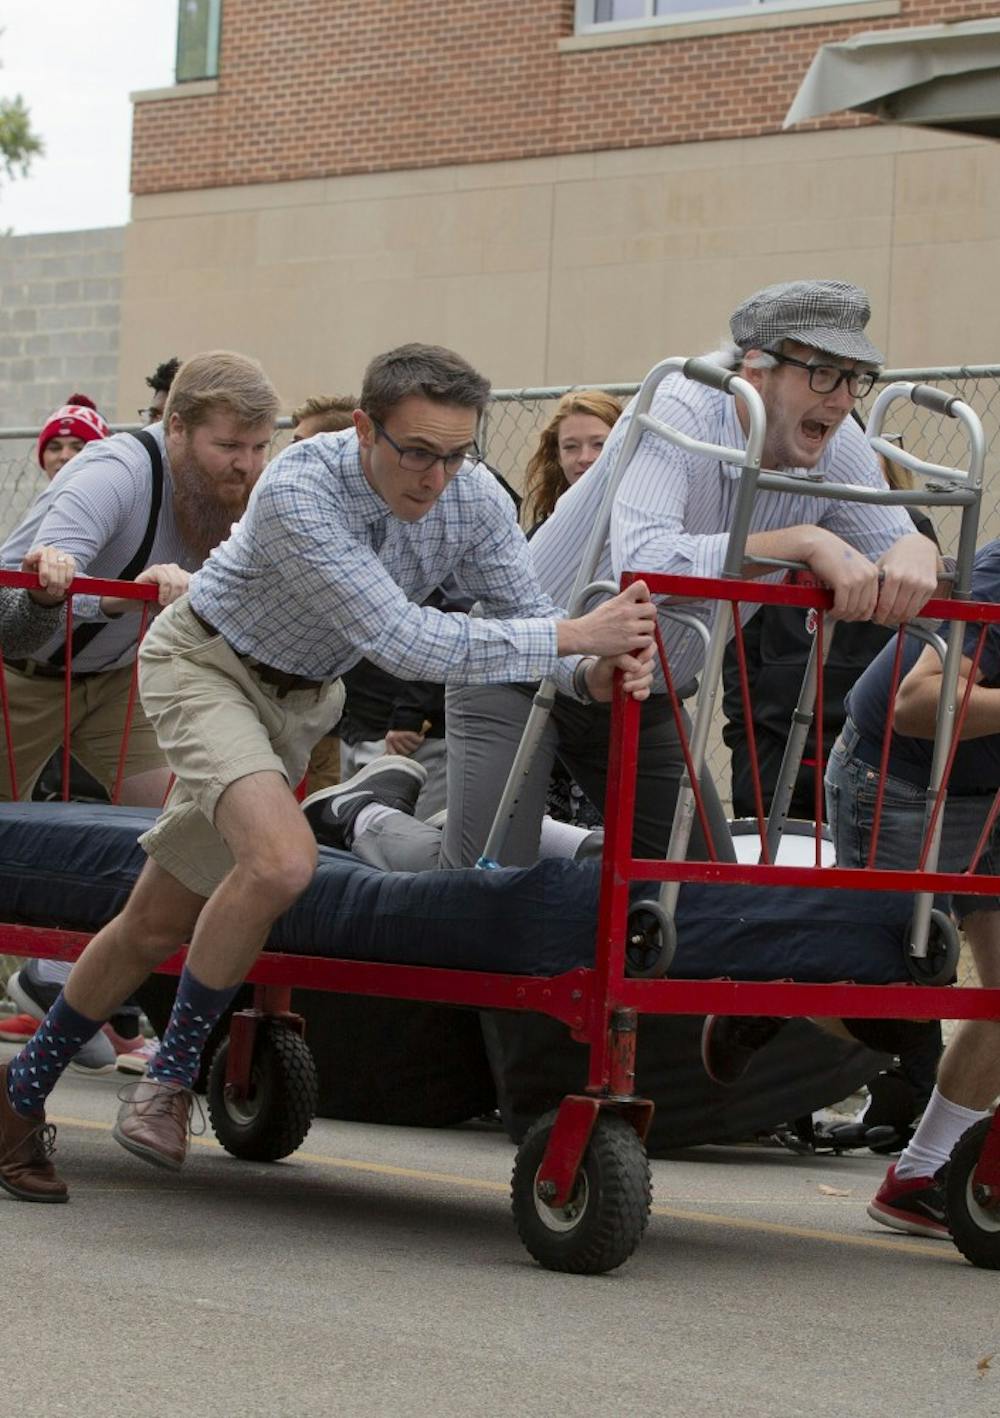  Ball State University students compete in the annual homecoming Bed Race Oct. 19, 2018, on Riverside Ave. The Bed Race is held as a part of Ball States homecoming festivities. Jacob Haberstroh,DN.